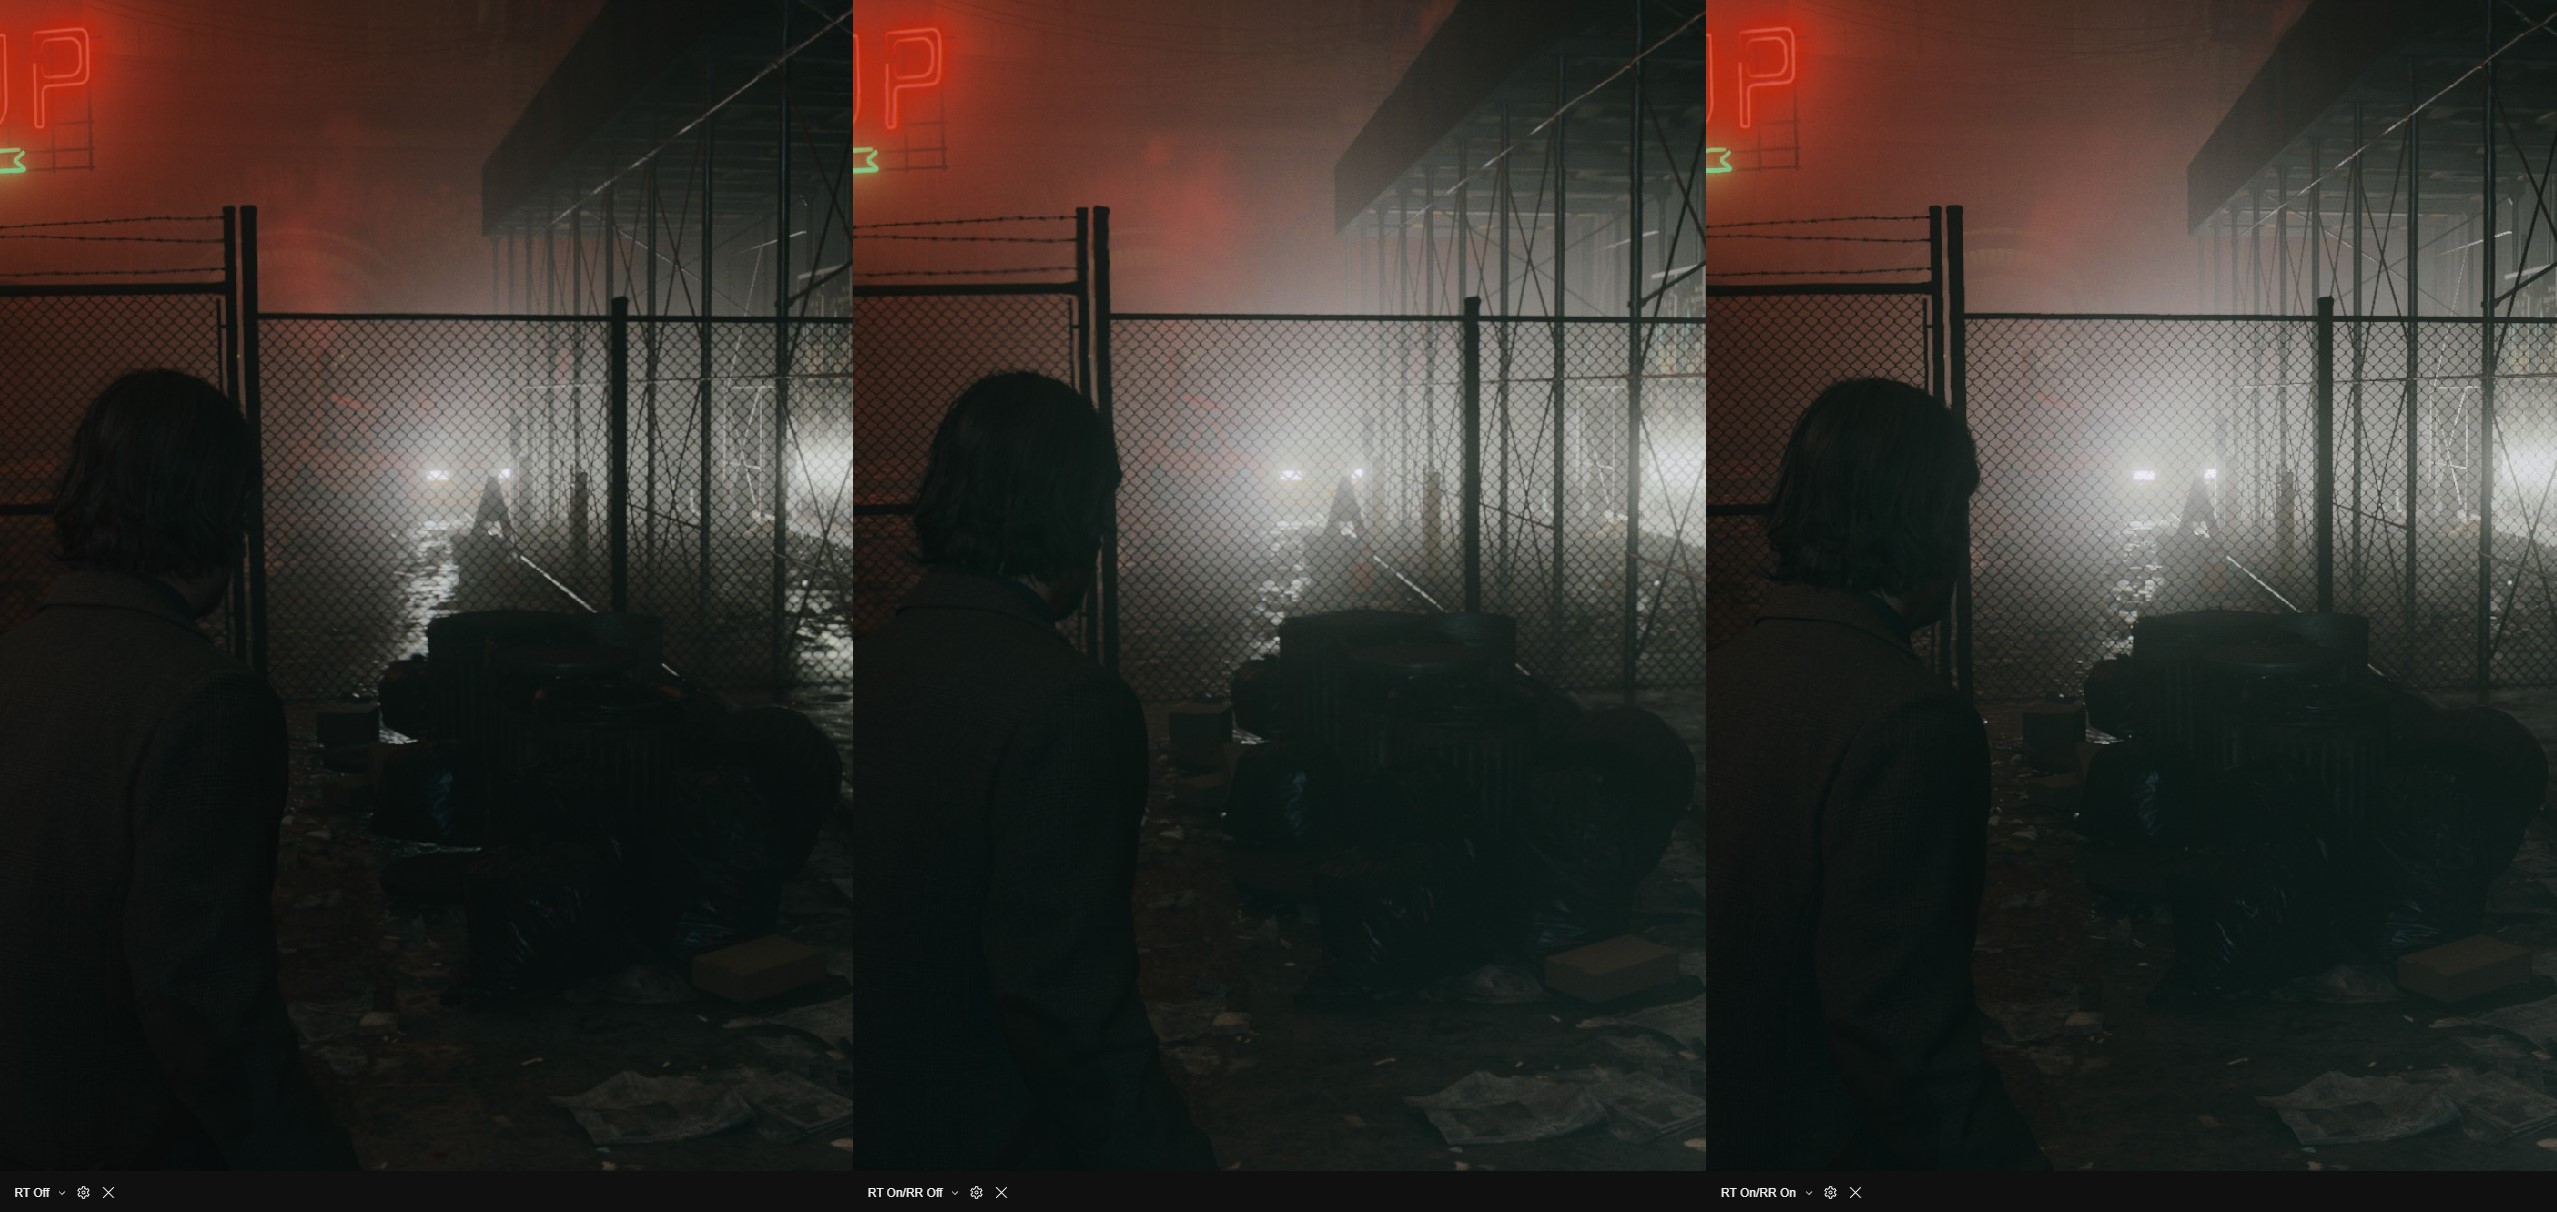 Alan Wake 2 system requirements need an RTX 2060 and DLSS for 30fps